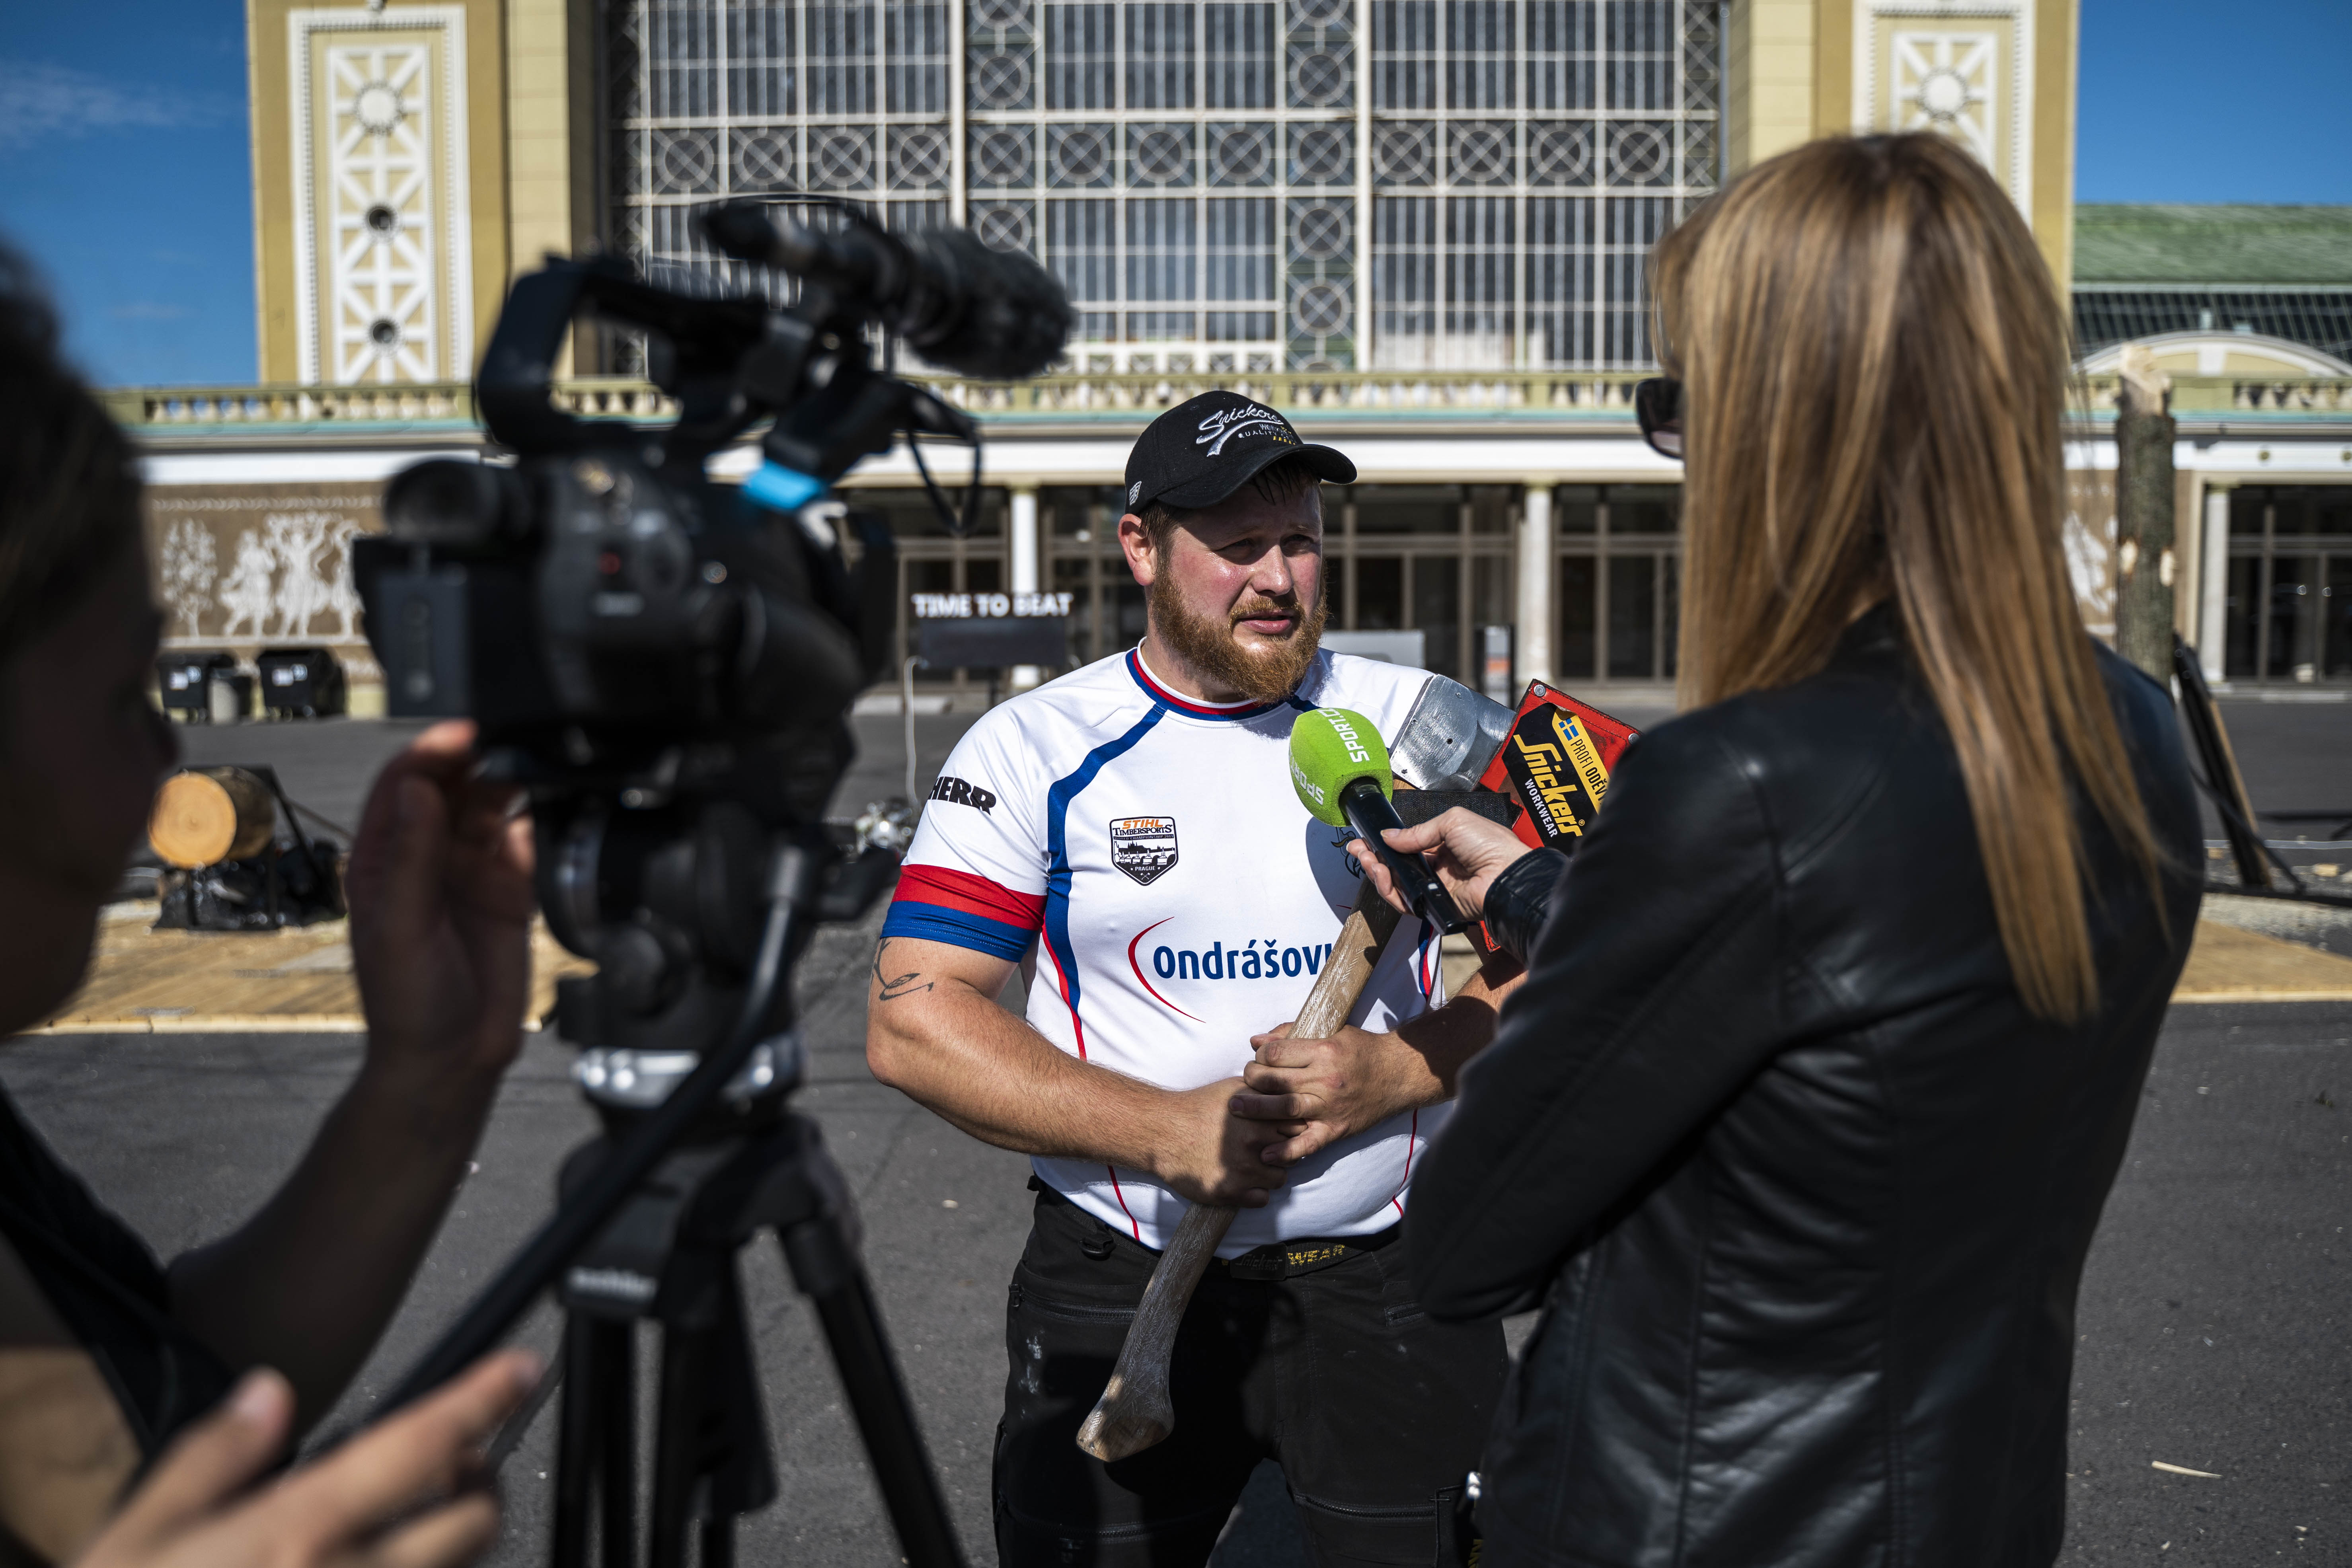 STIHL TIMBERSPORTS® athlete Martin_Rousal in an interview with the national TV station Ceska Televize.